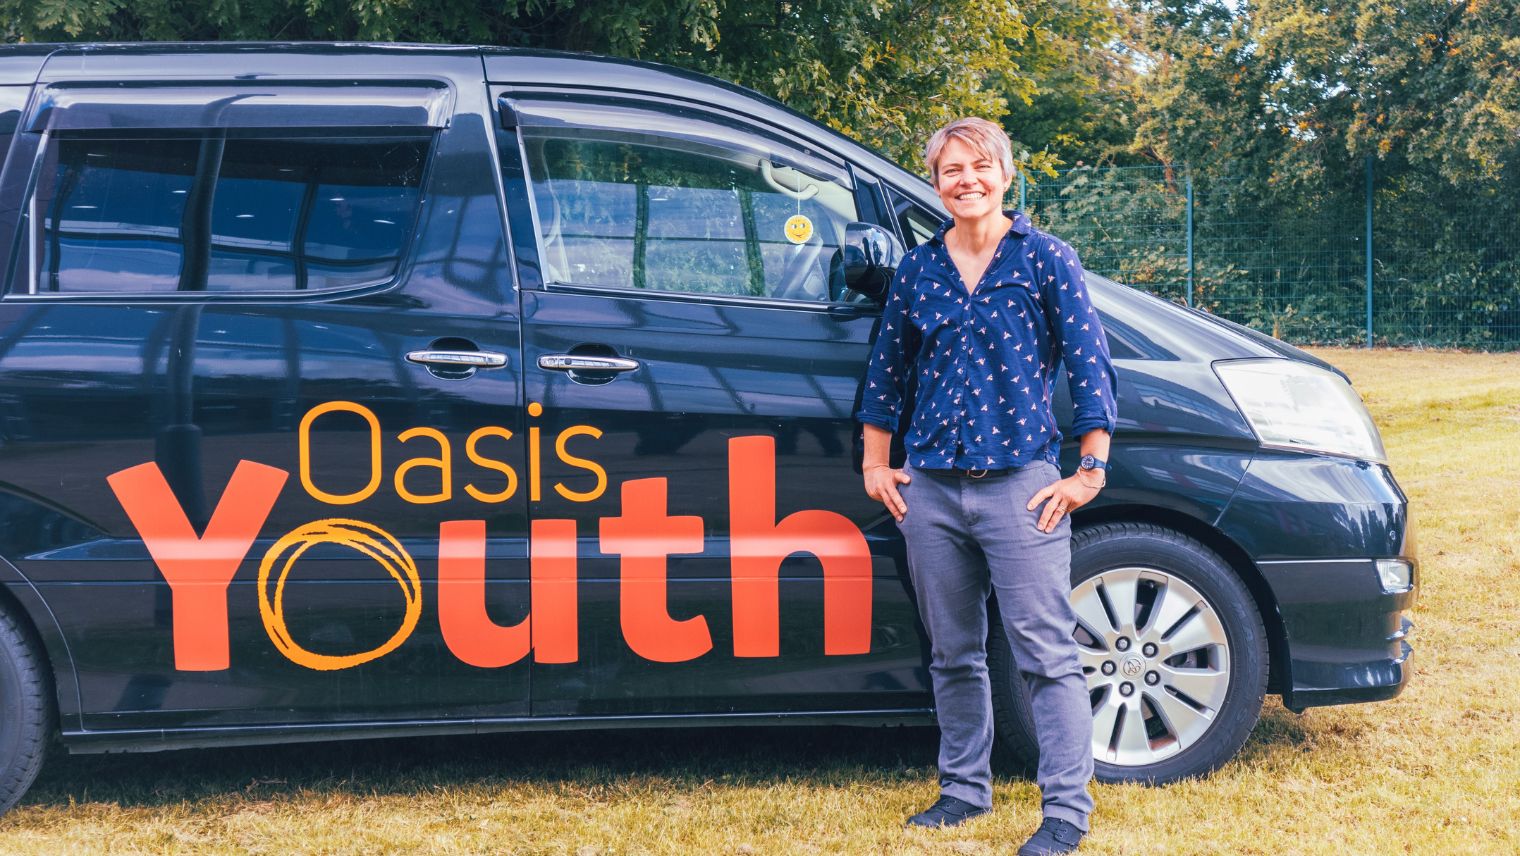 Person standing by the front wing of a blue van which says Oasis Youth on the side